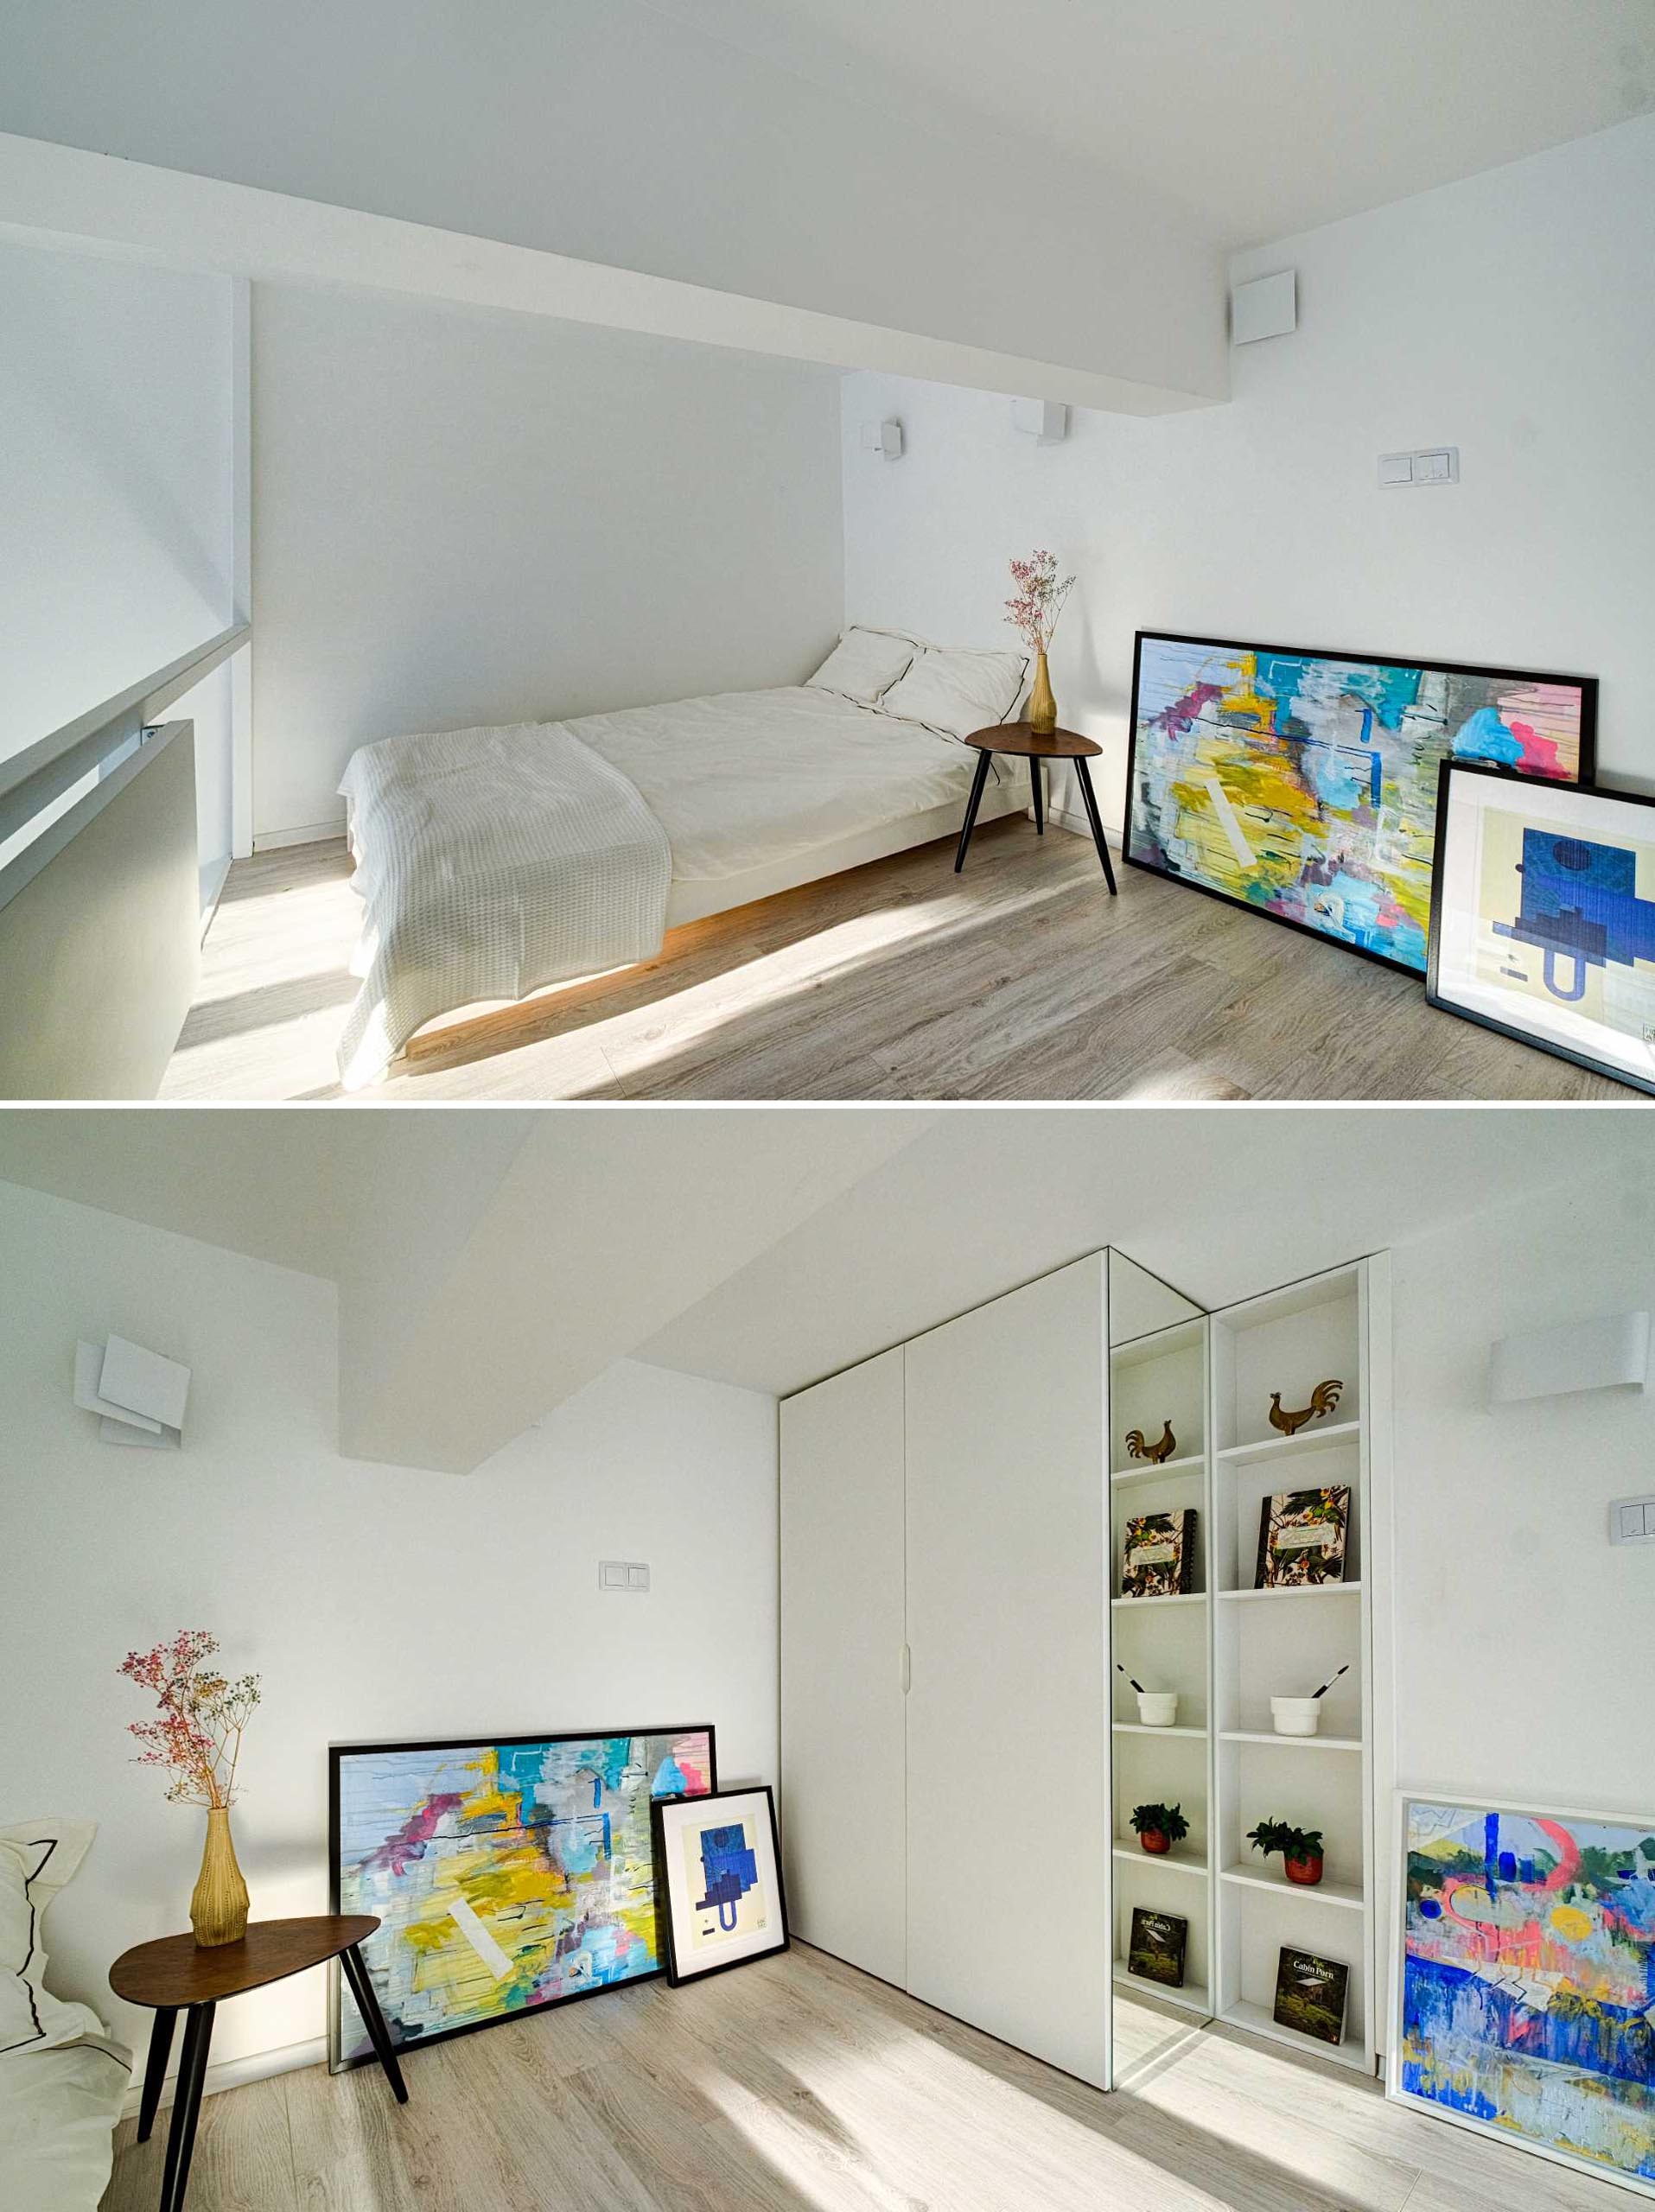 The loft bedroom is simply furnished, with a bed, side table, and artwork, as well as floor-to-ceiling closet.